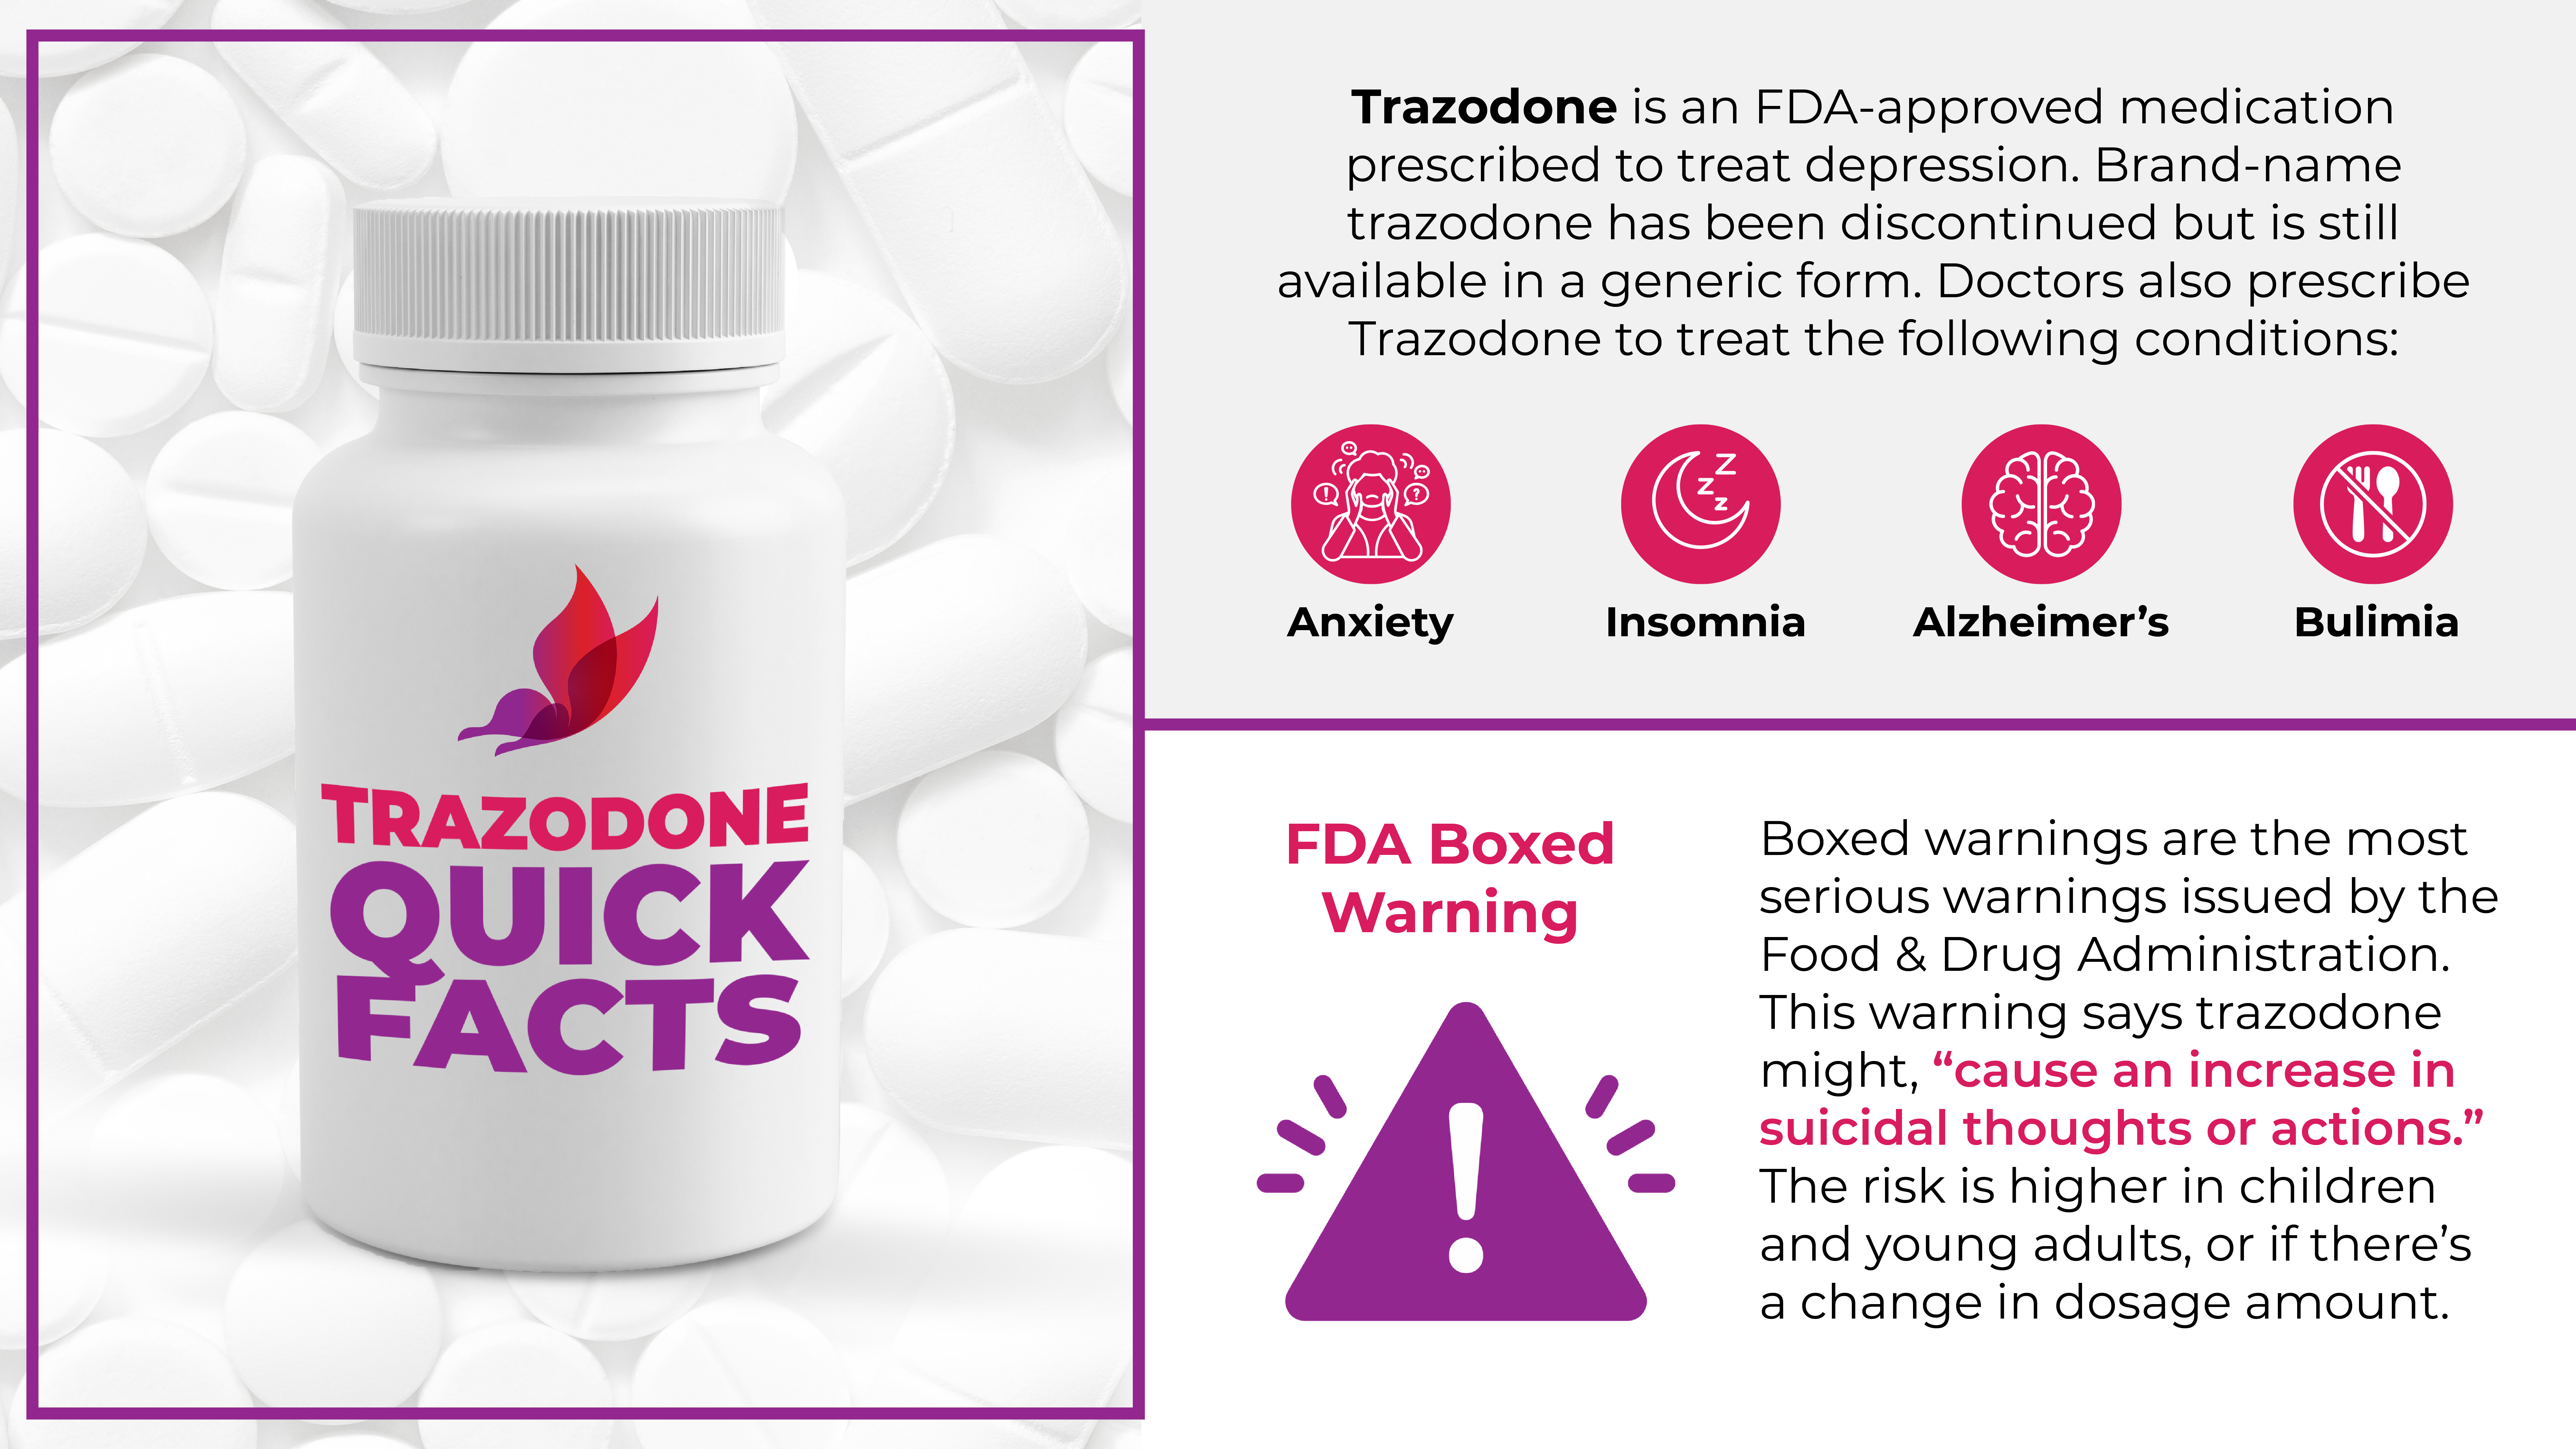 Trazodone quick facts and definition infographic